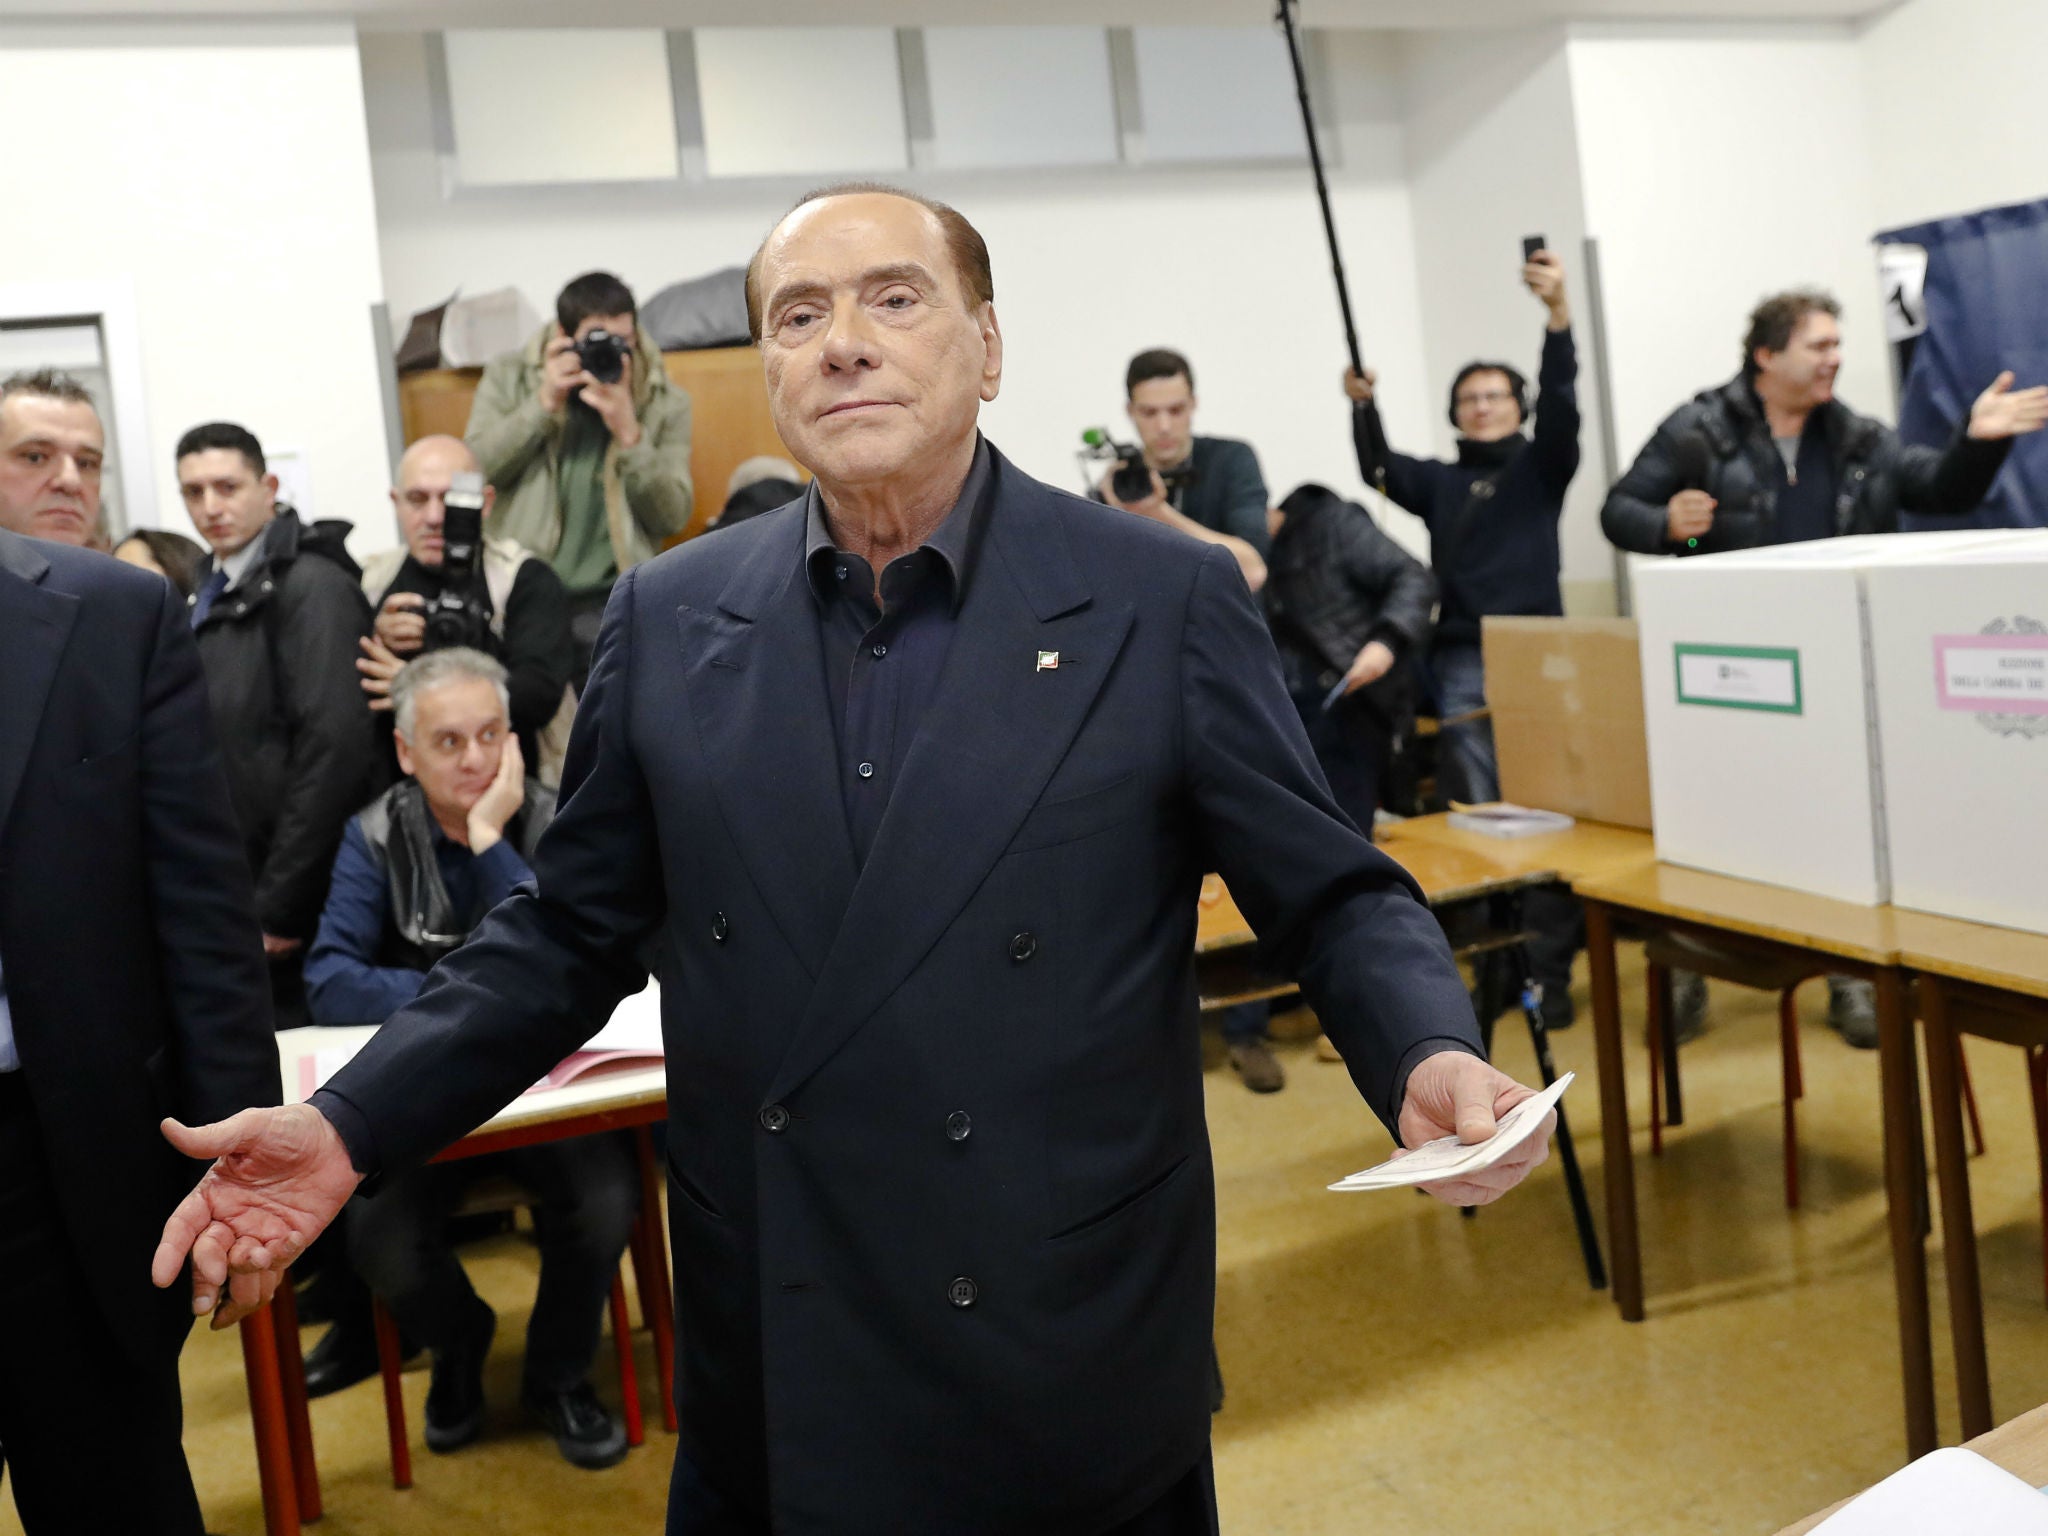 Despite his enduring appeal, to some Berlusconi remains an object of ridicule